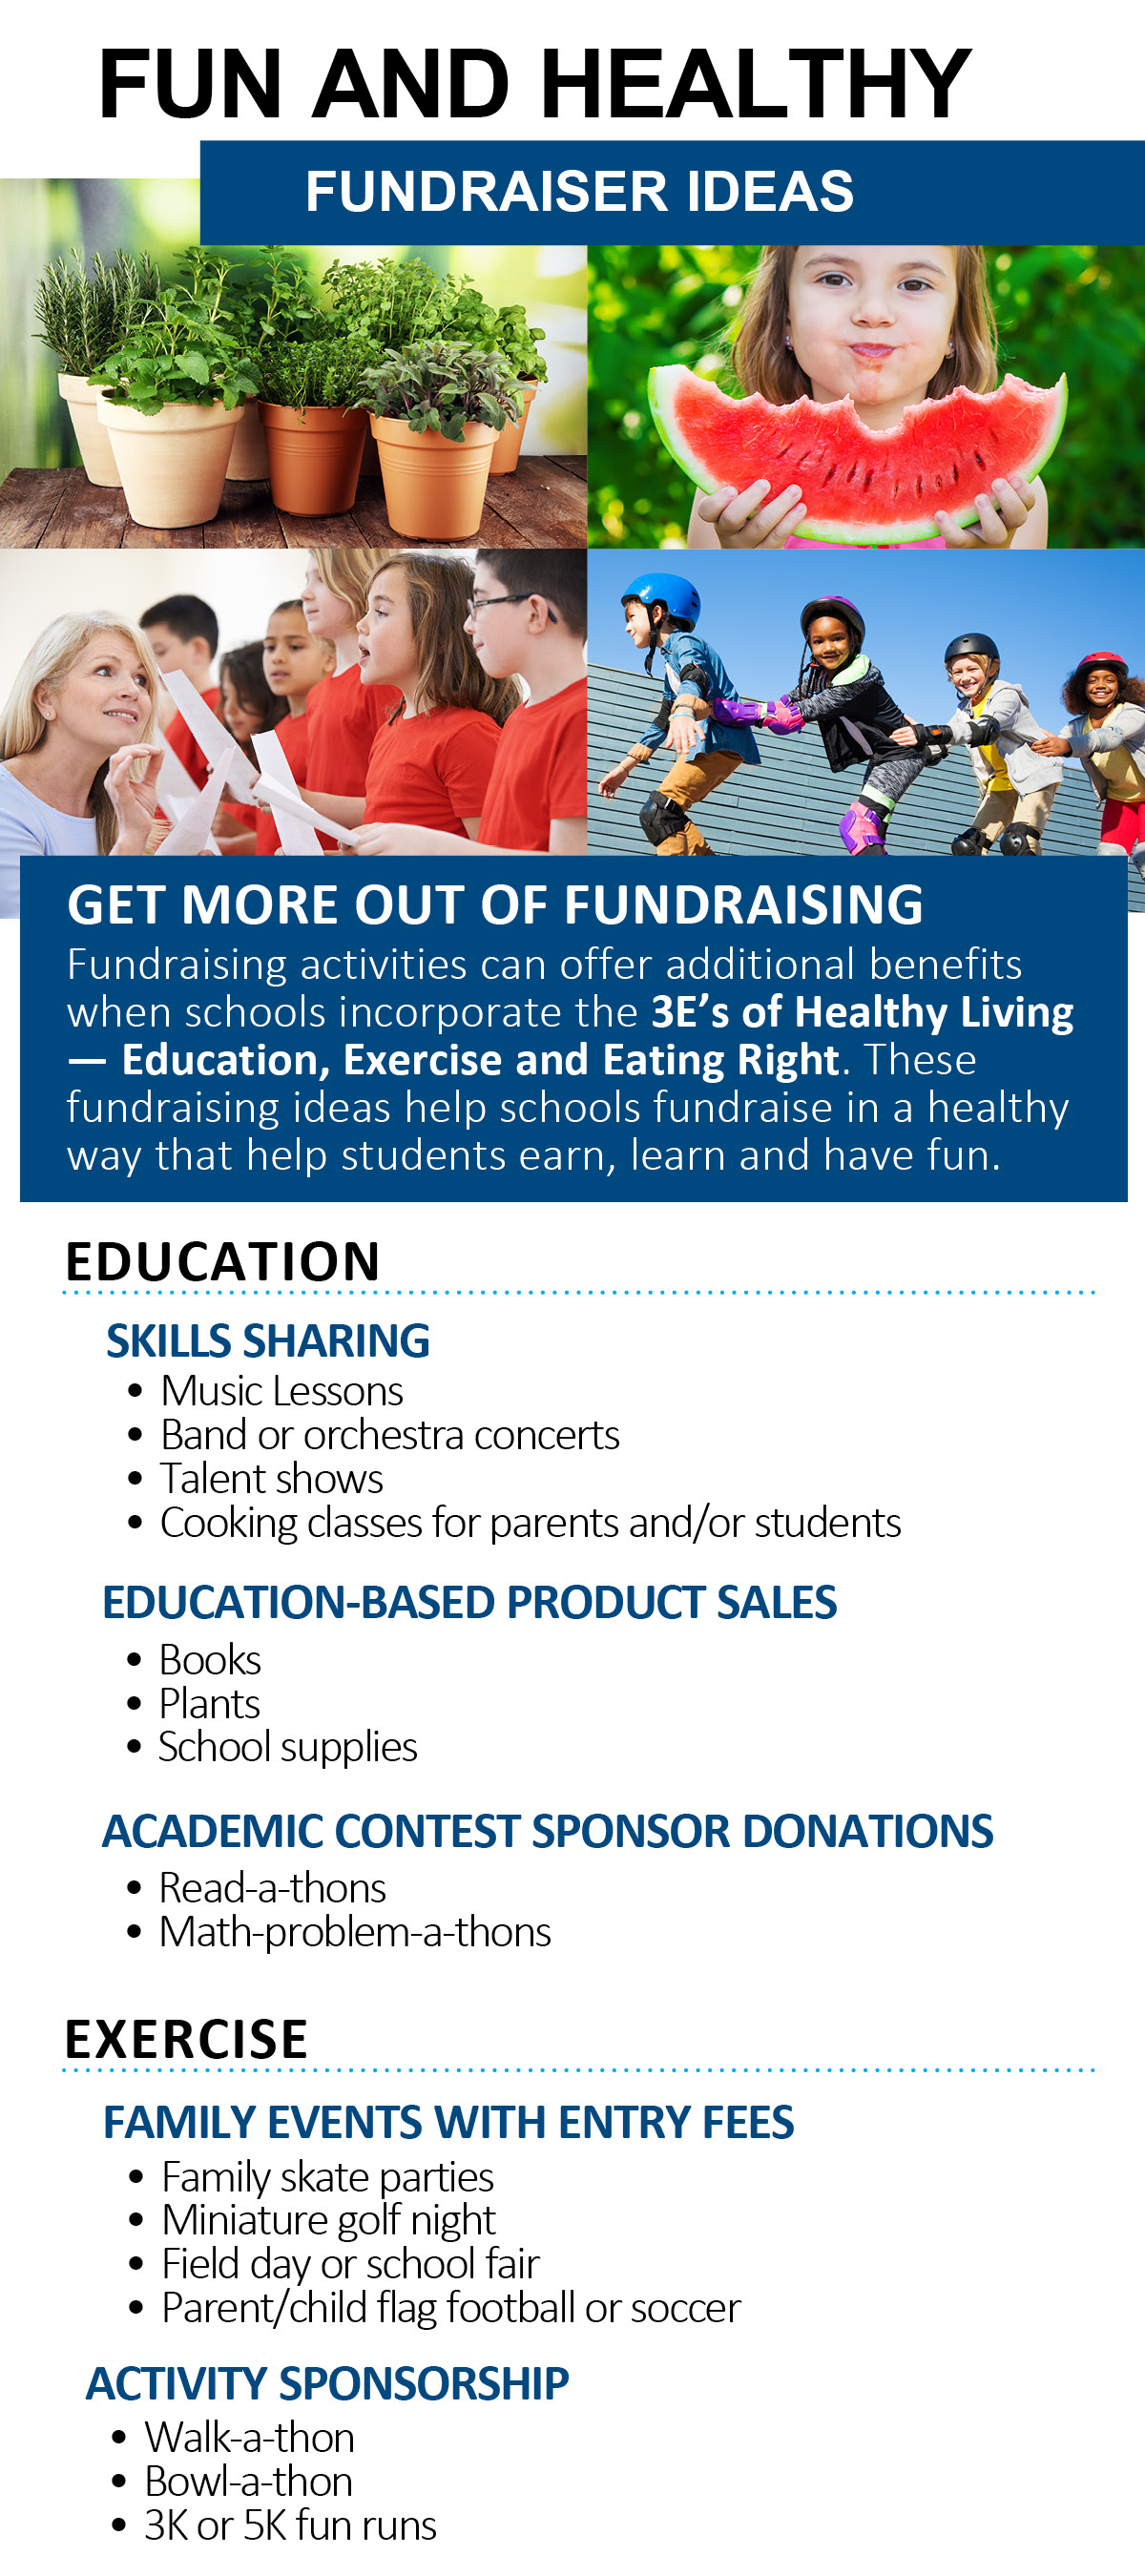 Fun and Healthy Fundraisers